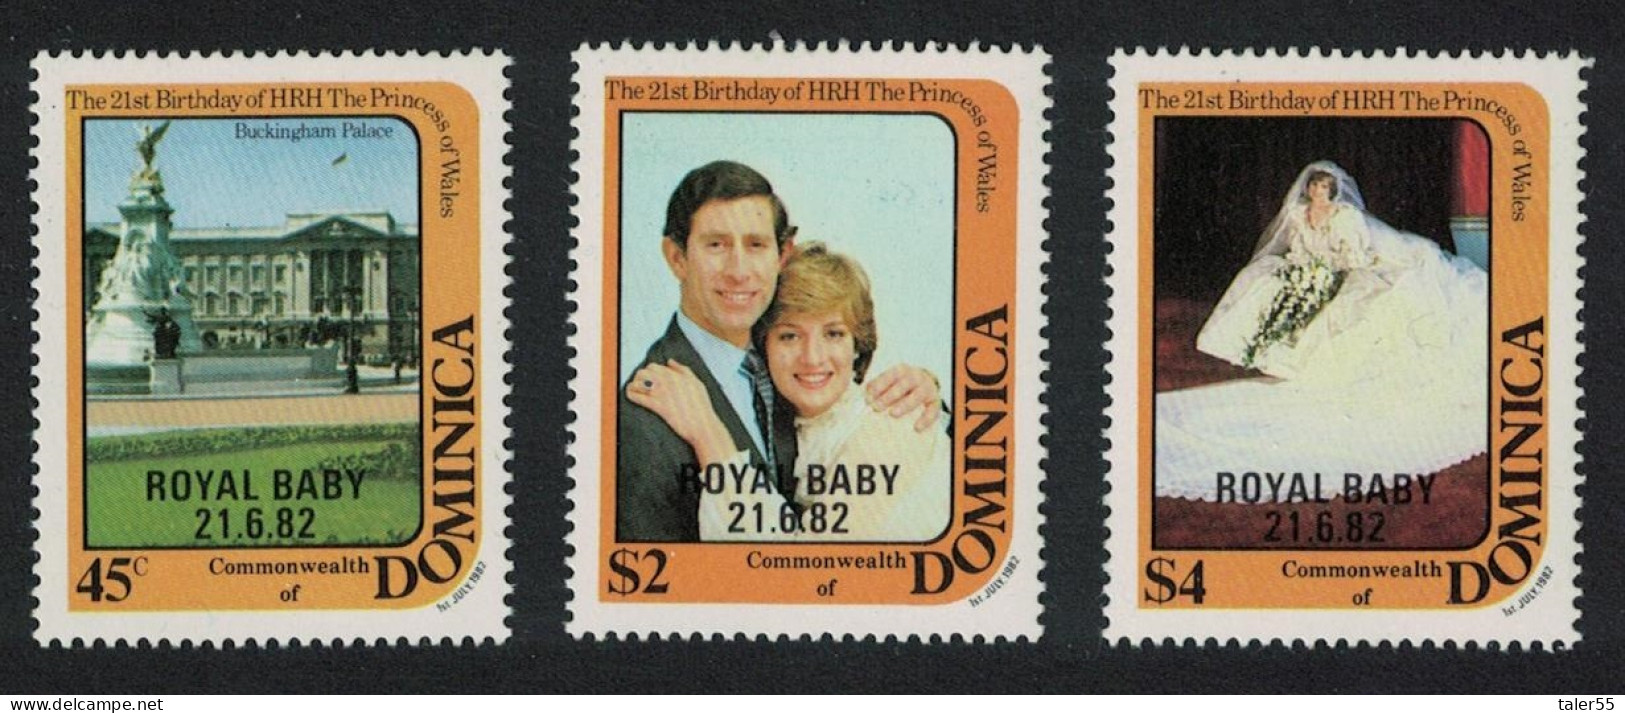 Dominica Birth Of Prince William Of Wales 3v 1982 MNH SG#830-832 - Dominica (1978-...)